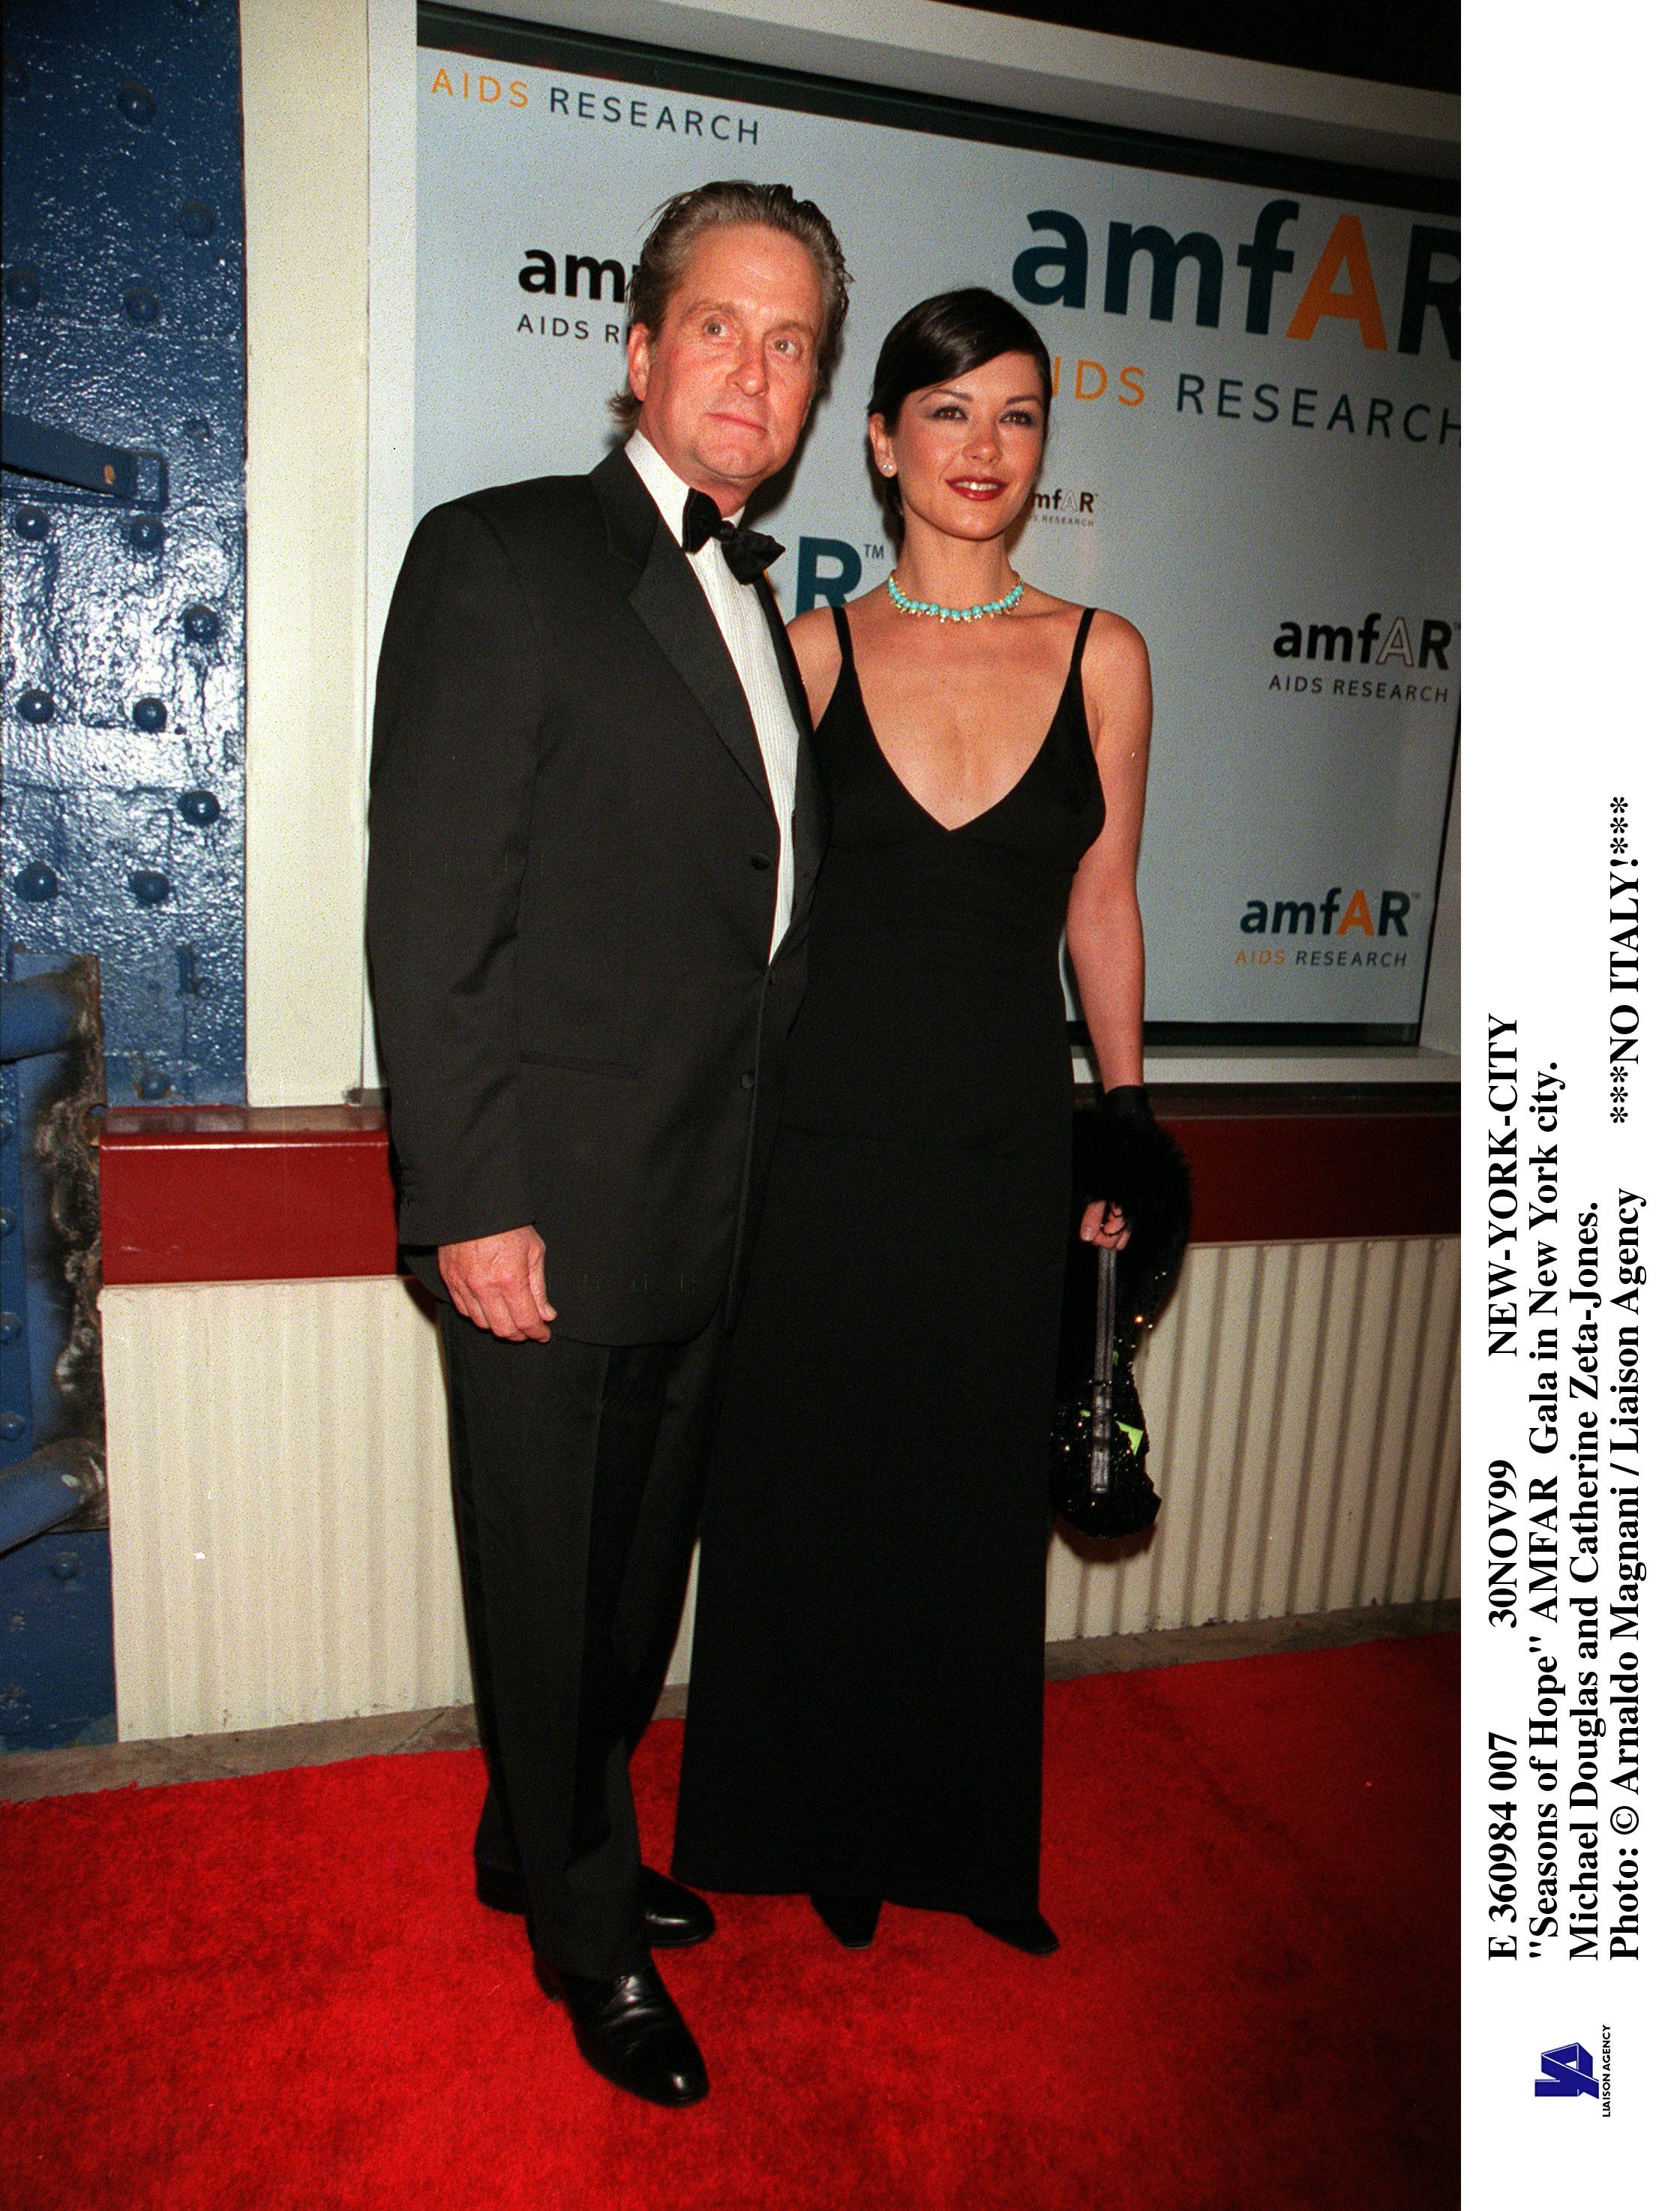 Michael Douglas And Catherine Zeta-Jones at the Amfar Gala In New York City in 1999 | Source: Getty Images